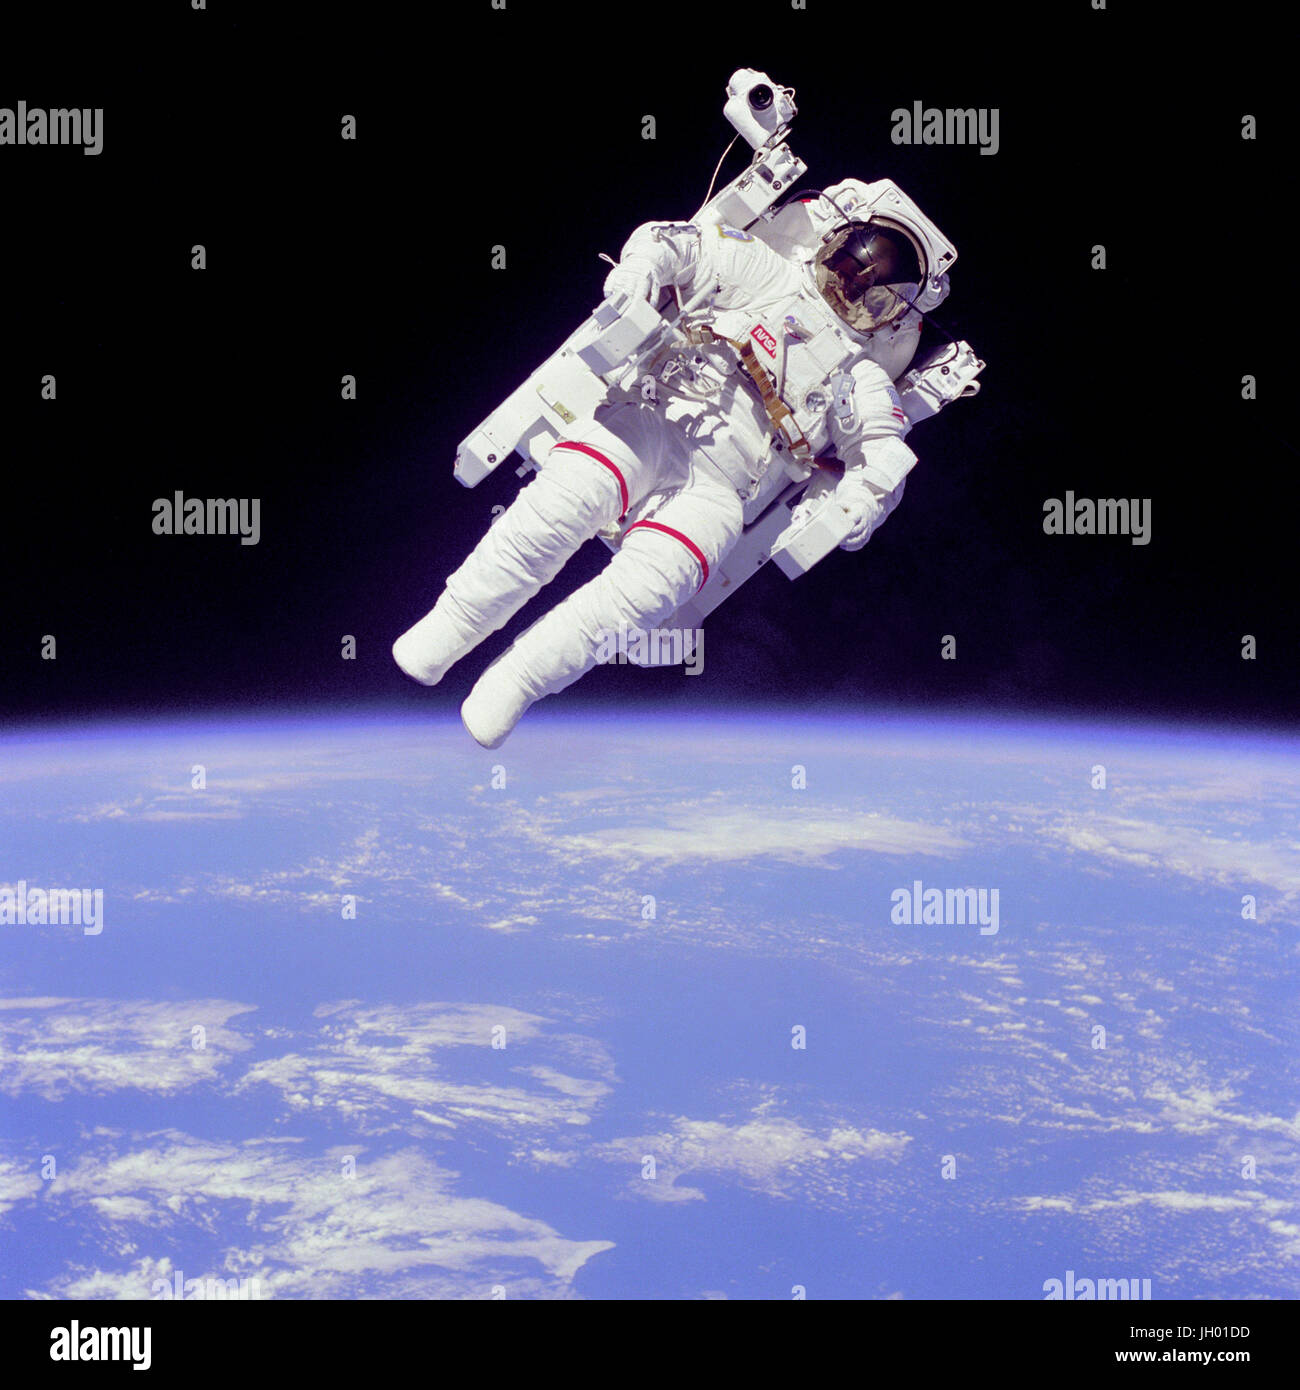 'Backpacking'.Full Description.Mission Specialist Bruce McCandless II ventured further away from the confines and safety of his ship than any previous astronaut ever has. This space first was made possible by the Manned Manuevering Unit or MMU, a nitrogen jet propelled backpack. After a series of test maneuvers inside and above Challenger's payload bay, McCandless went 'free-flying' to a distance of 320 feet away from the Orbiter. The MMU is controled by joy sticks positioned at the end of the arm rests. Moving the joy sticks left or right or by pulling them fires nitrogen jet thrusters propel Stock Photo